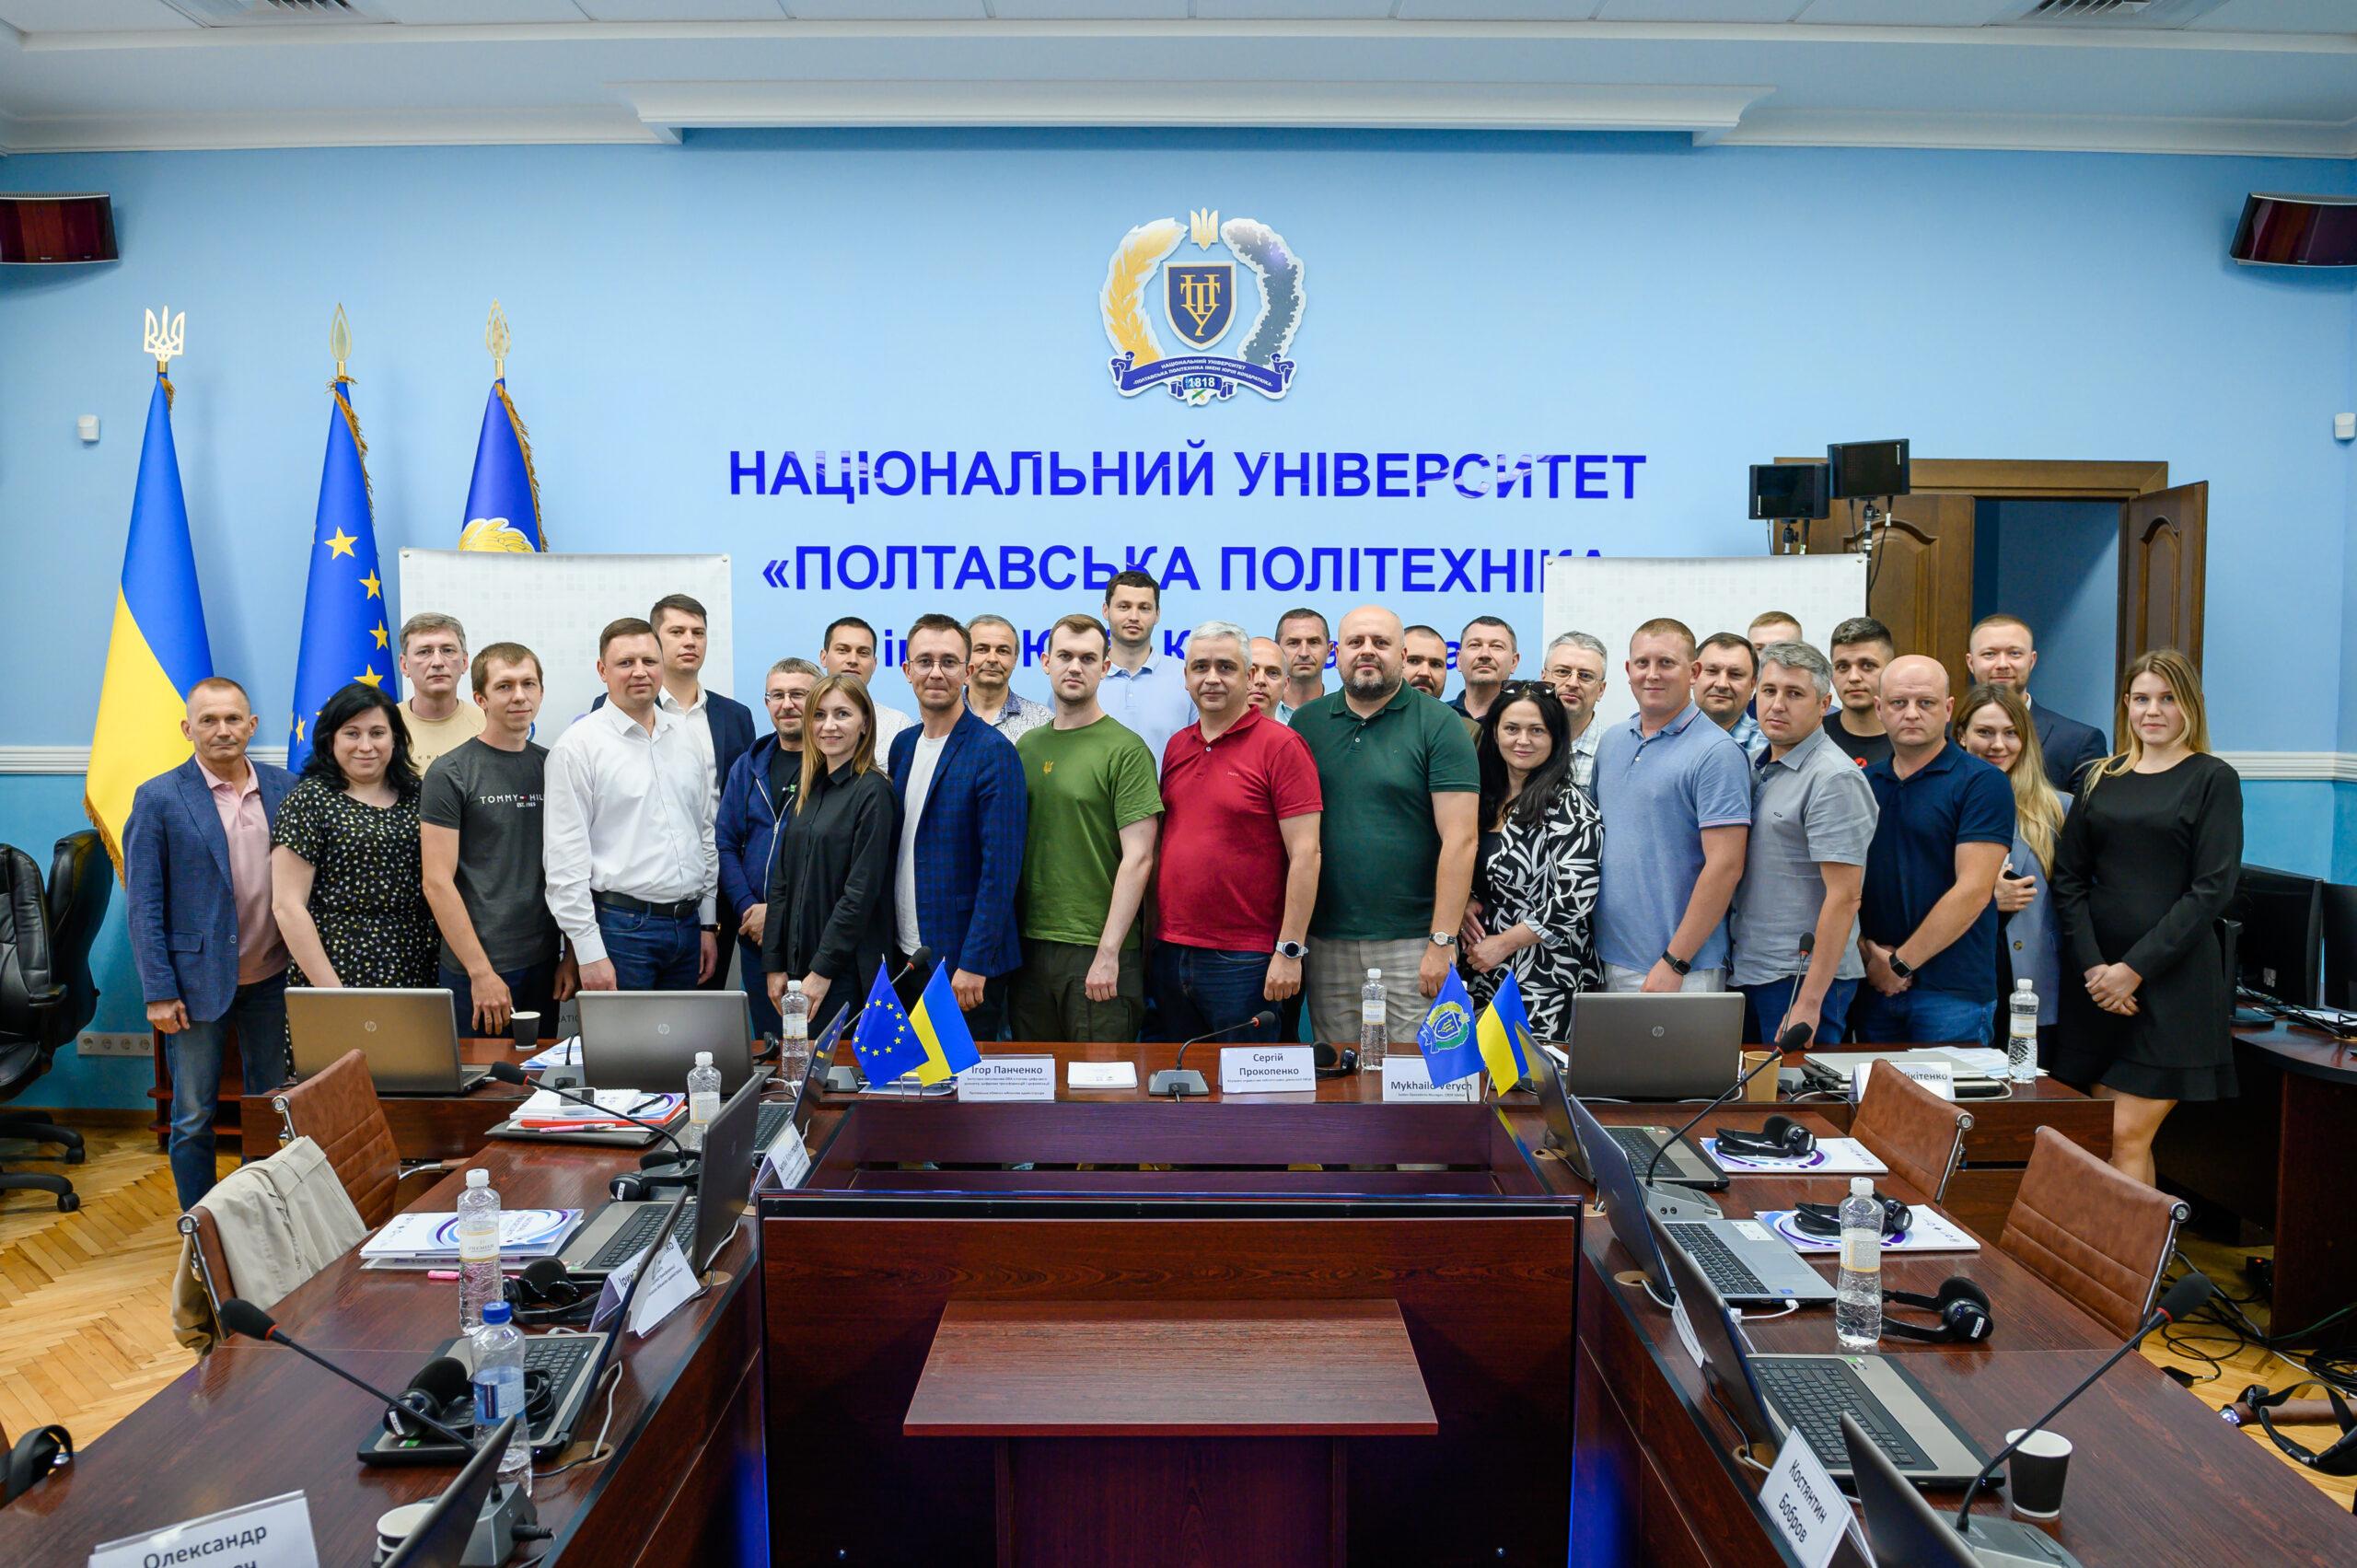 Third Regional Meeting of the National Cybersecurity Cluster Took Place in Poltava